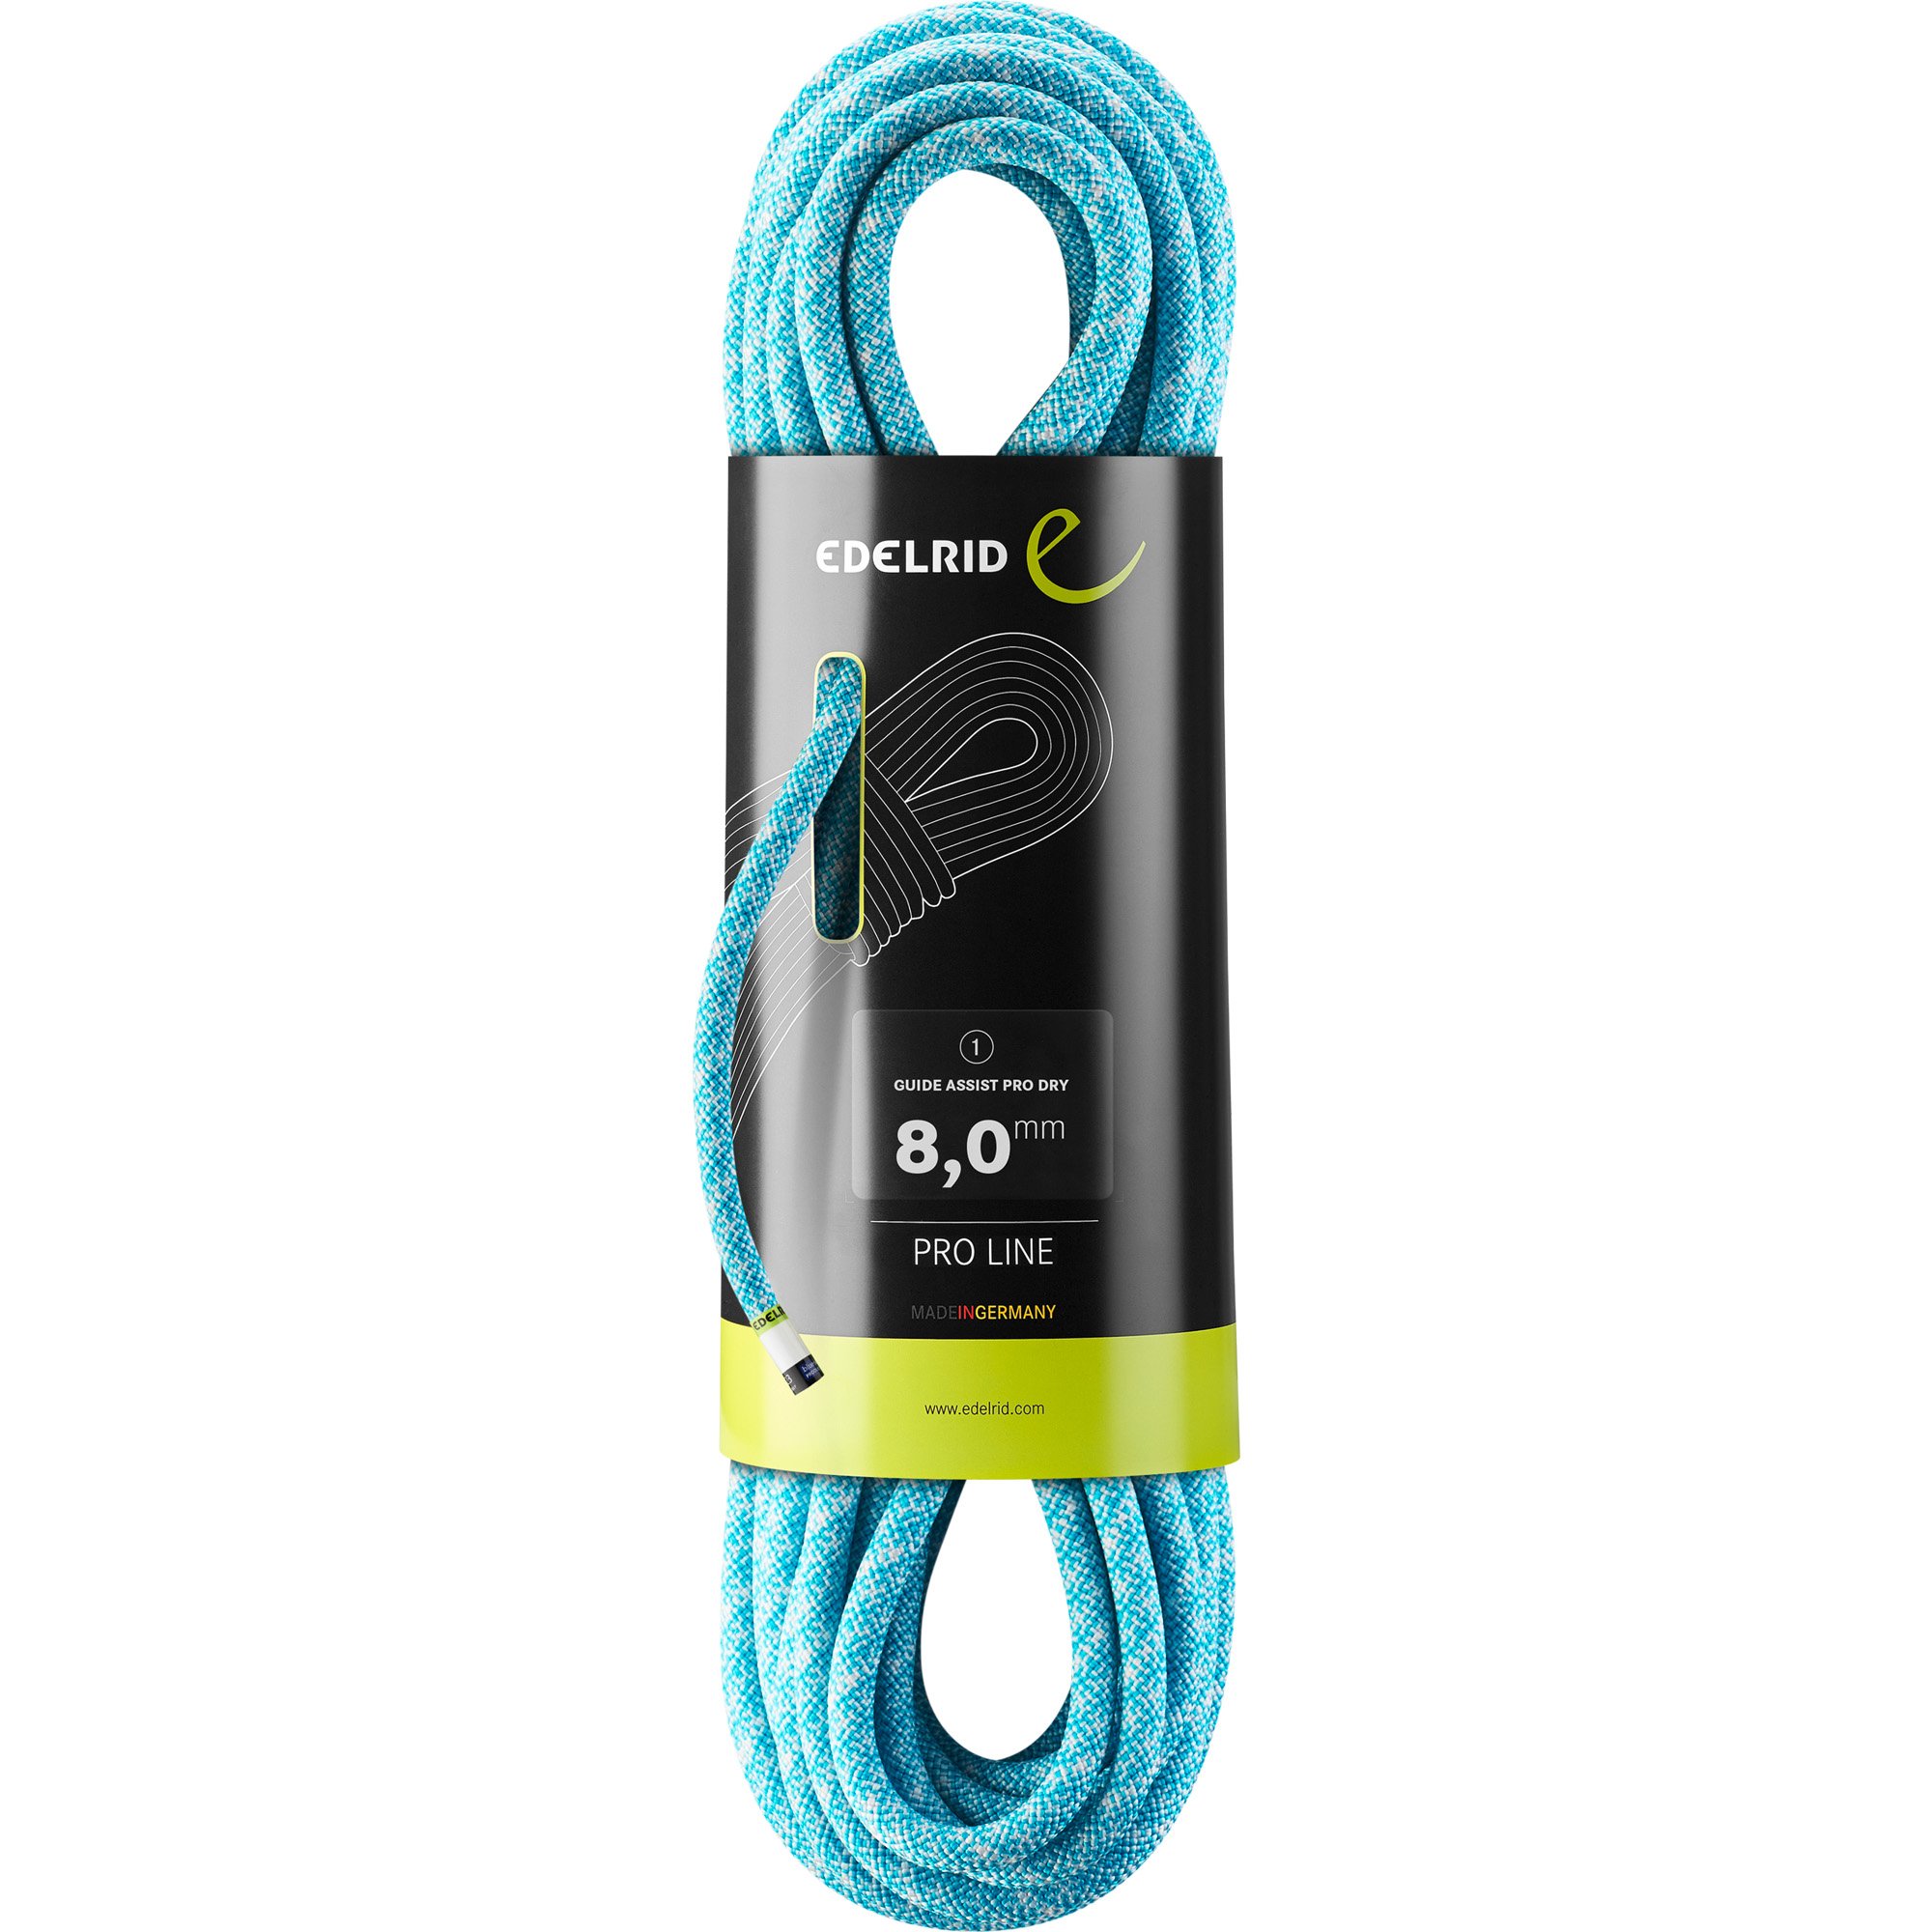 Edelrid Guide Assist Pro Dry 8mm Climbing Rope Accessory Cord